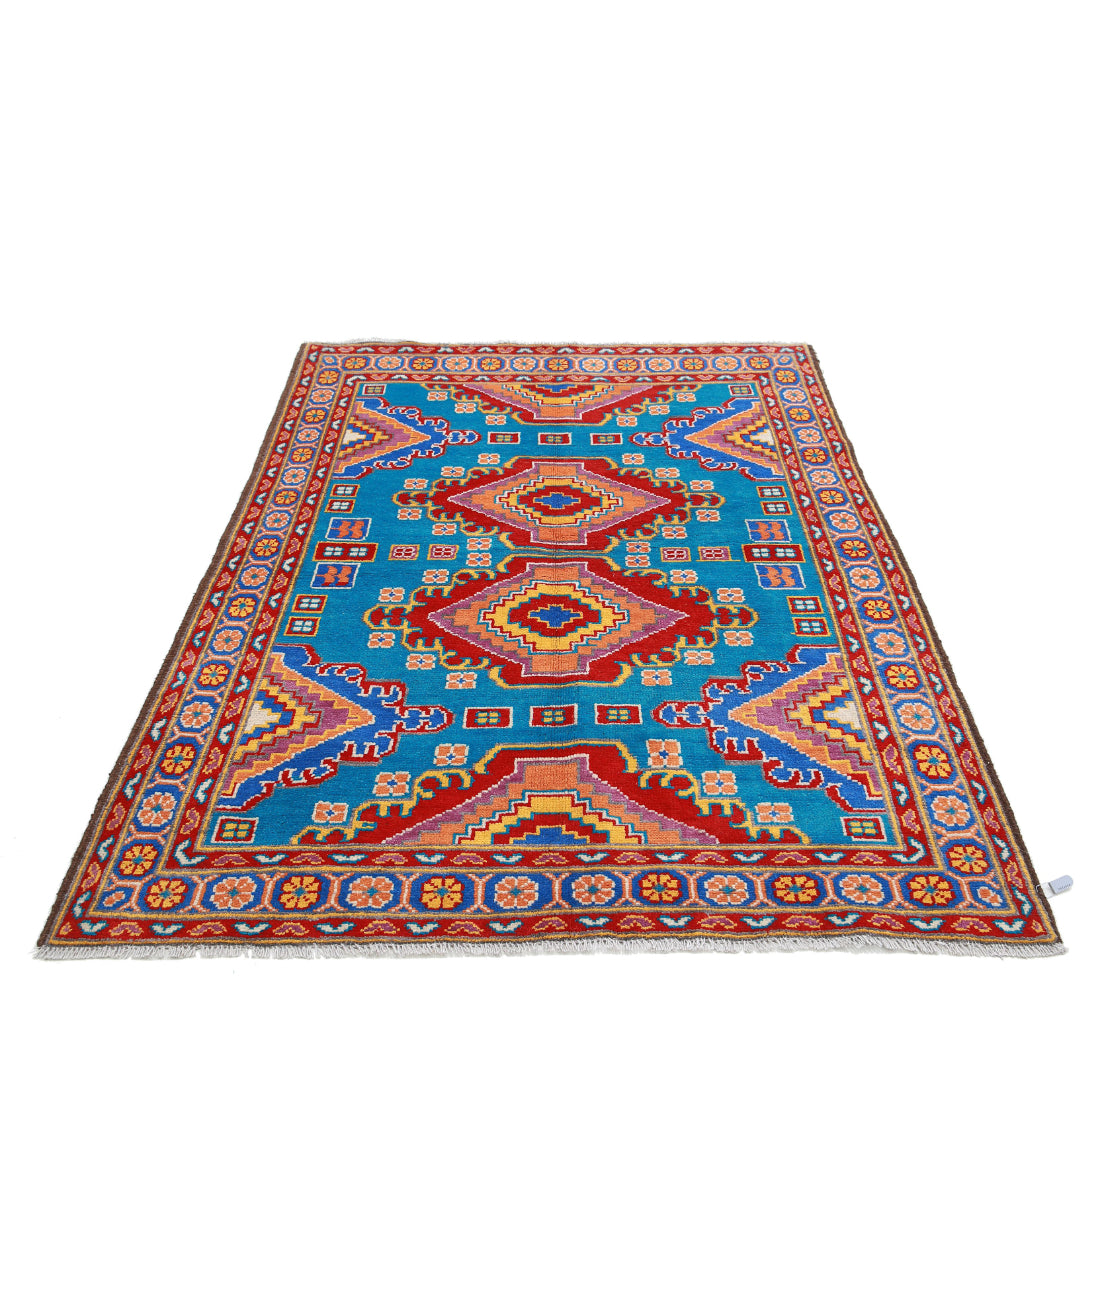 Revival 4'9'' X 6'8'' Hand-Knotted Wool Rug 4'9'' x 6'8'' (143 X 200) / Teal / Blue